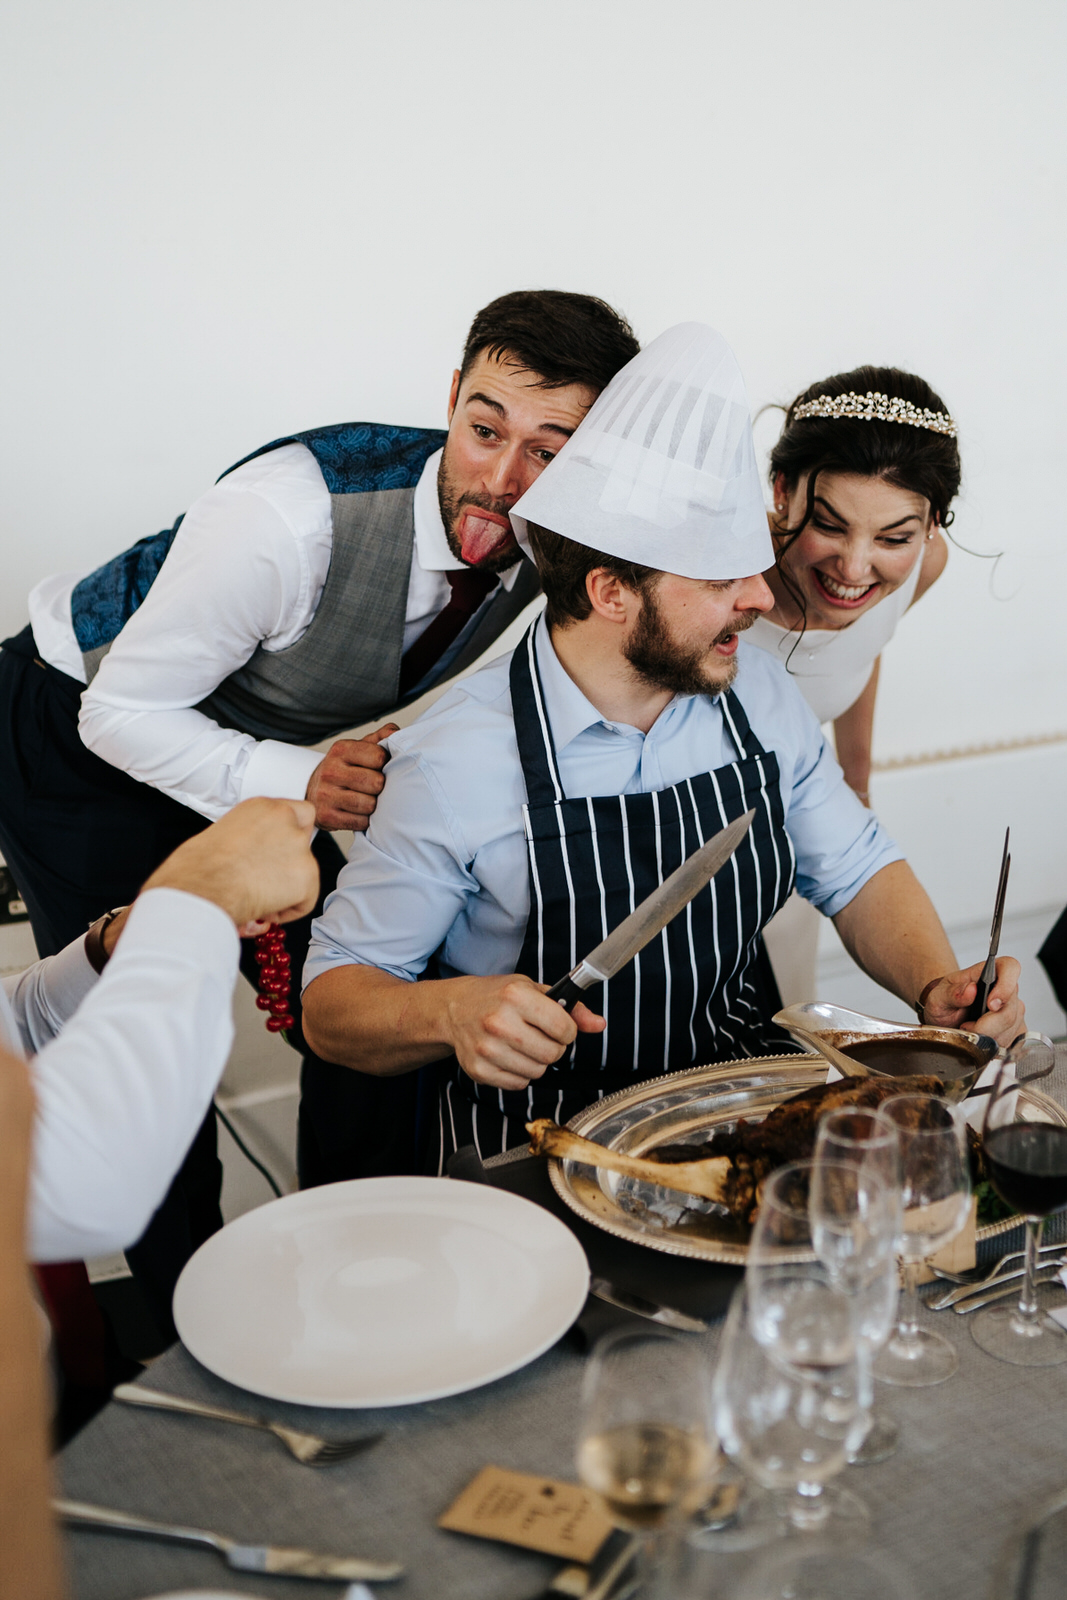  Bride and groom make funny faces at one of the guests carving the meat for his table 